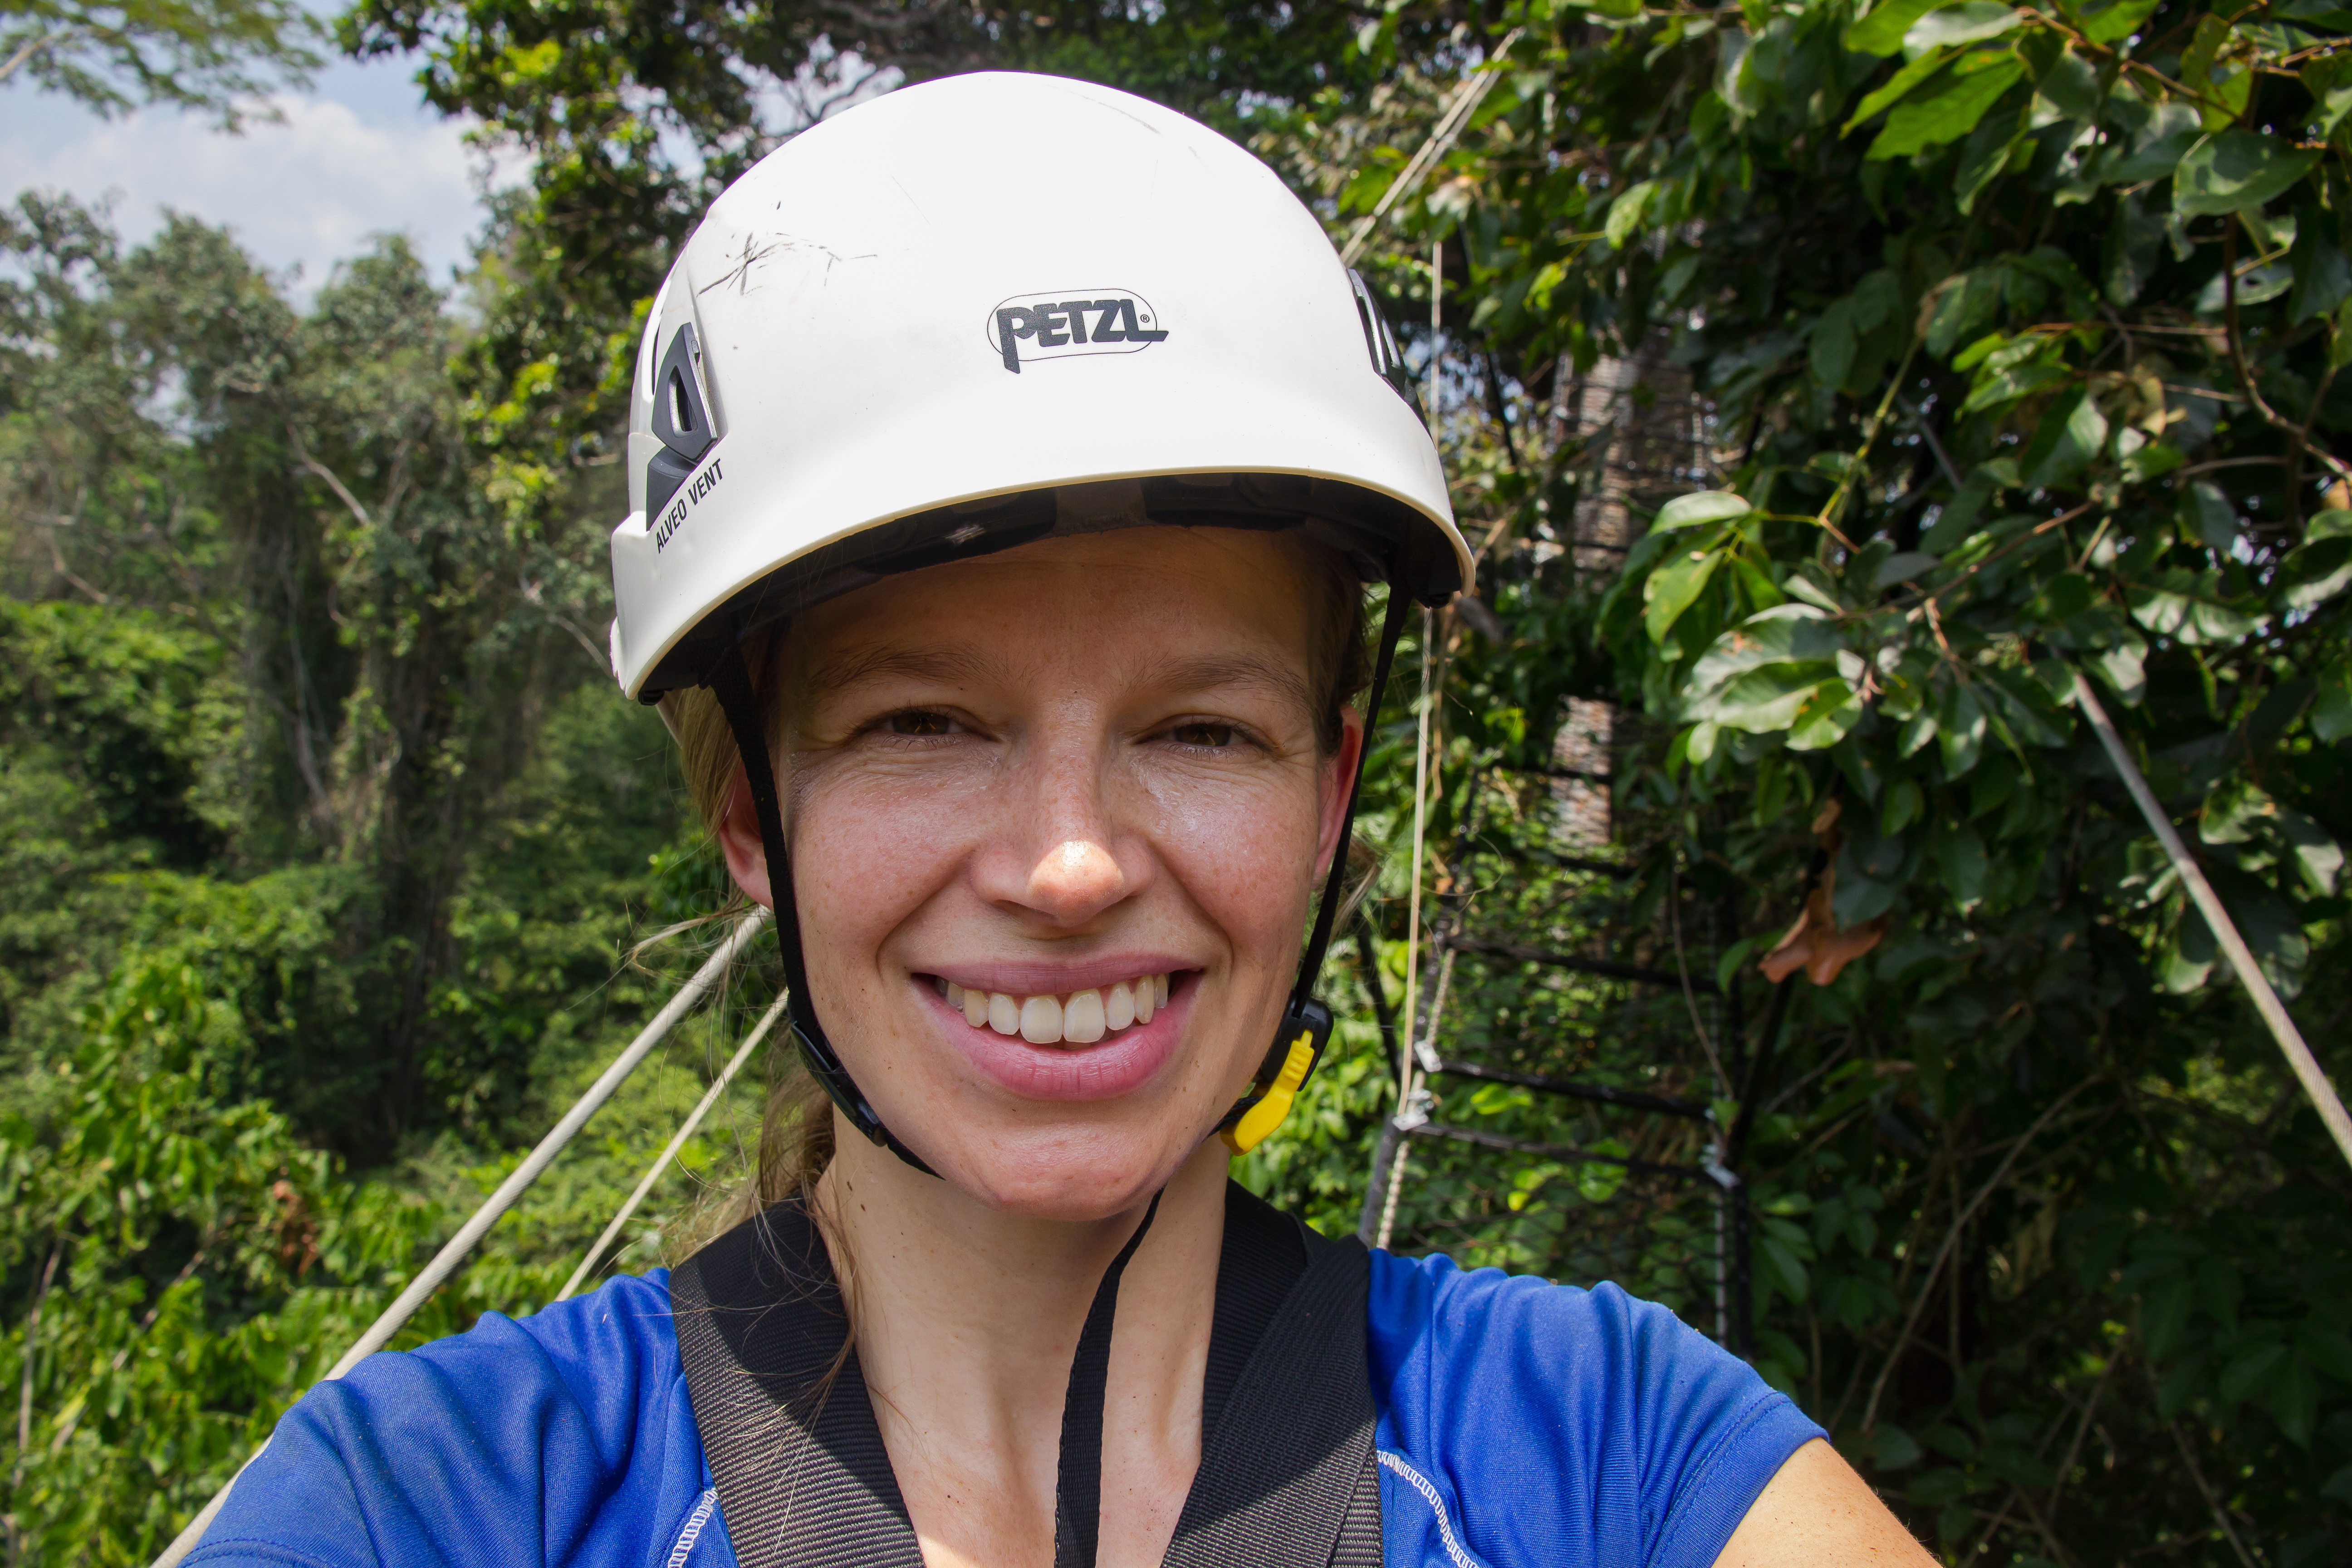 Marielle Smith stands on a canopy walkway, which hangs almost 30 m above the forest floor in the Tapajós National Forest. The walkway provides researchers with easy access to study upper canopy leaves, as well as breath-taking views over the forest. [Photo taken by Marielle N. Smith]